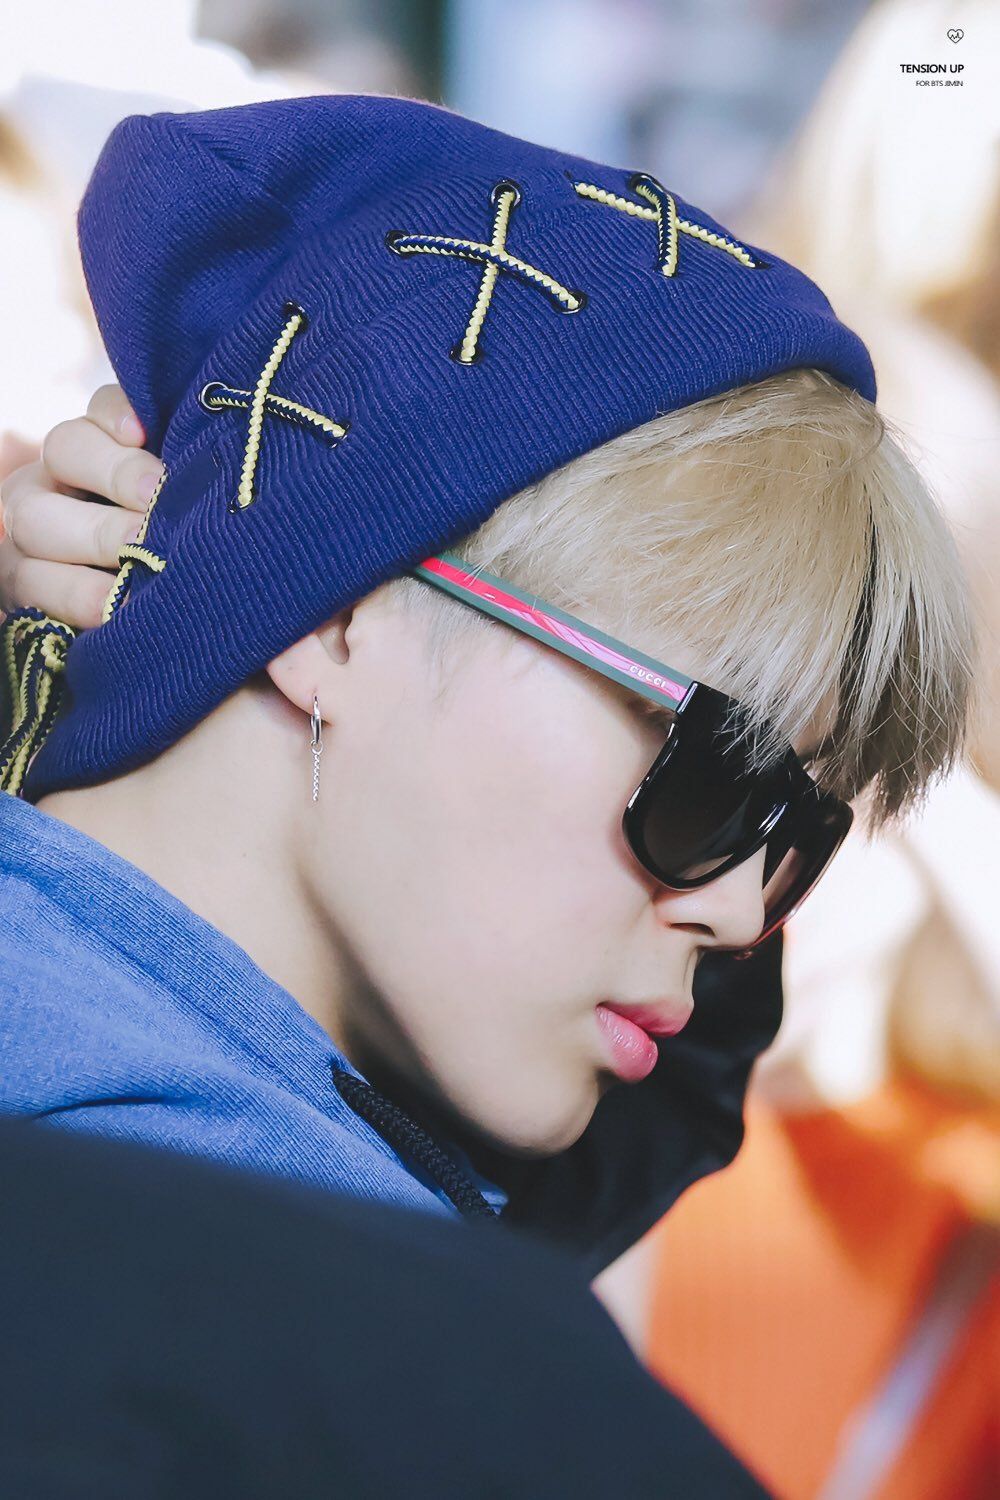 Fans Reveal Definitive Proof That Jimin's Jawline Has Completely Changed Since Debut